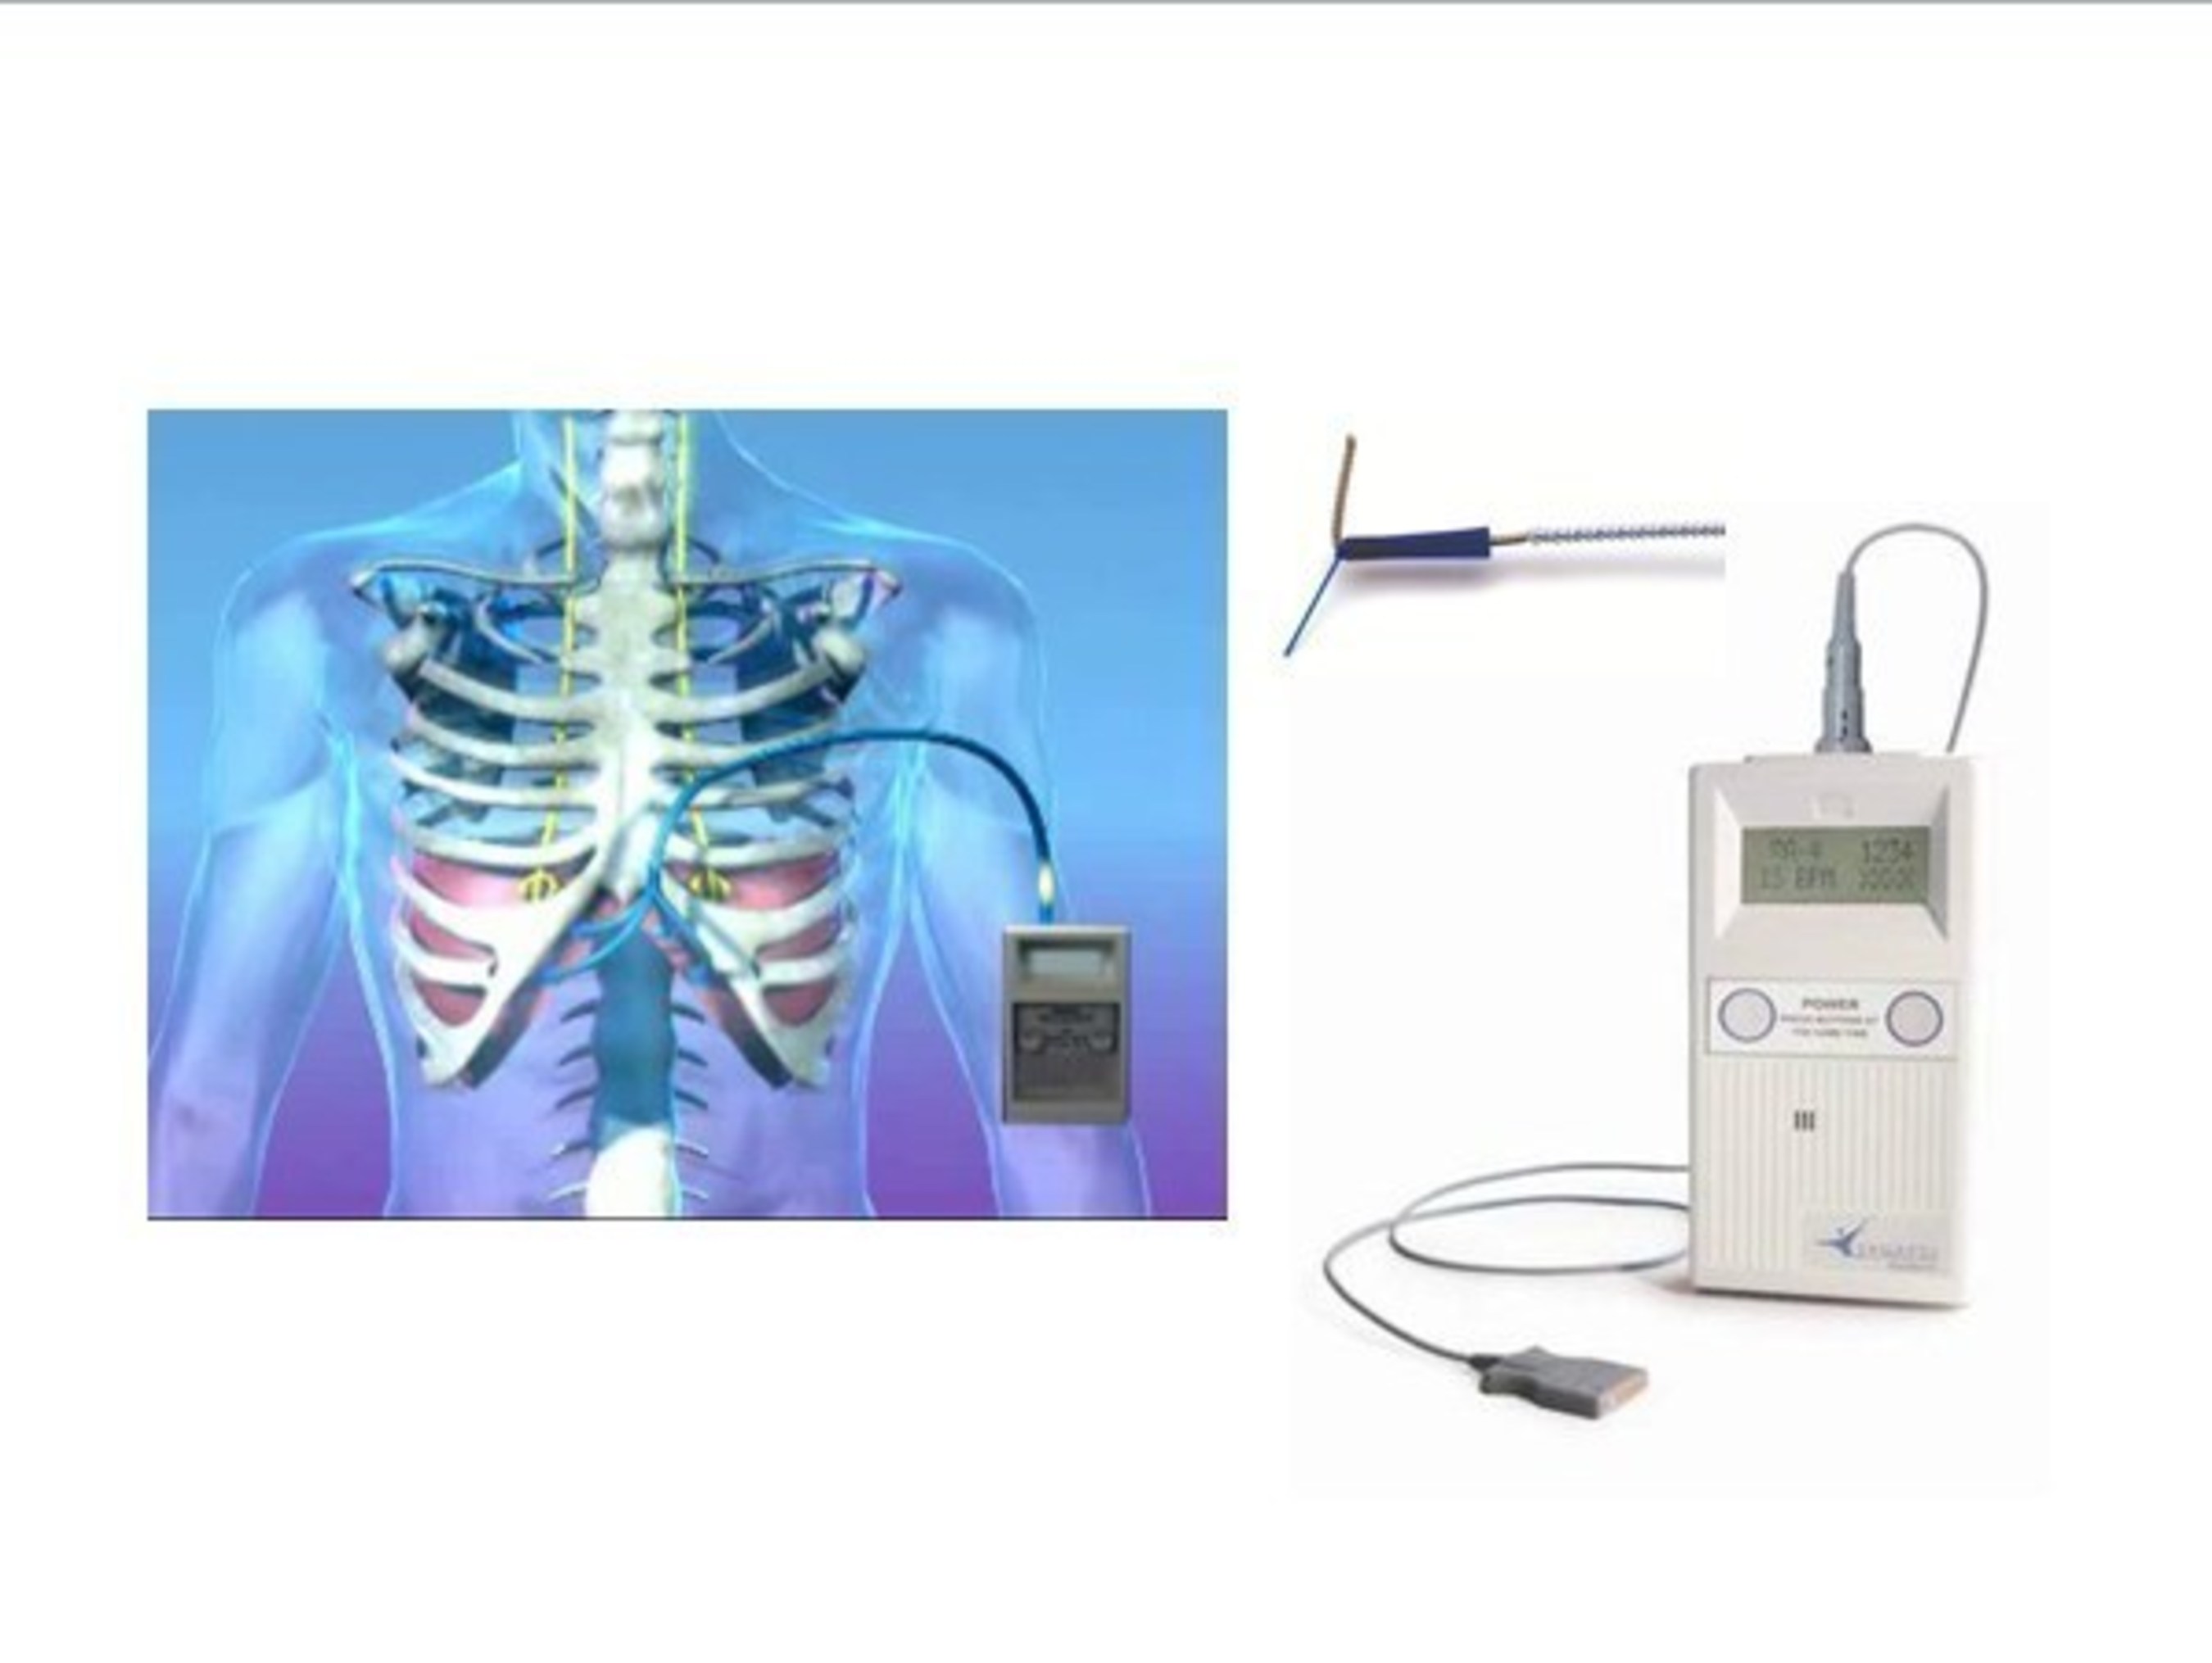 NeuRx Diaphragm Pacing System (DPS) approved by FDA, HDE,  for spinal cord and ALS patients